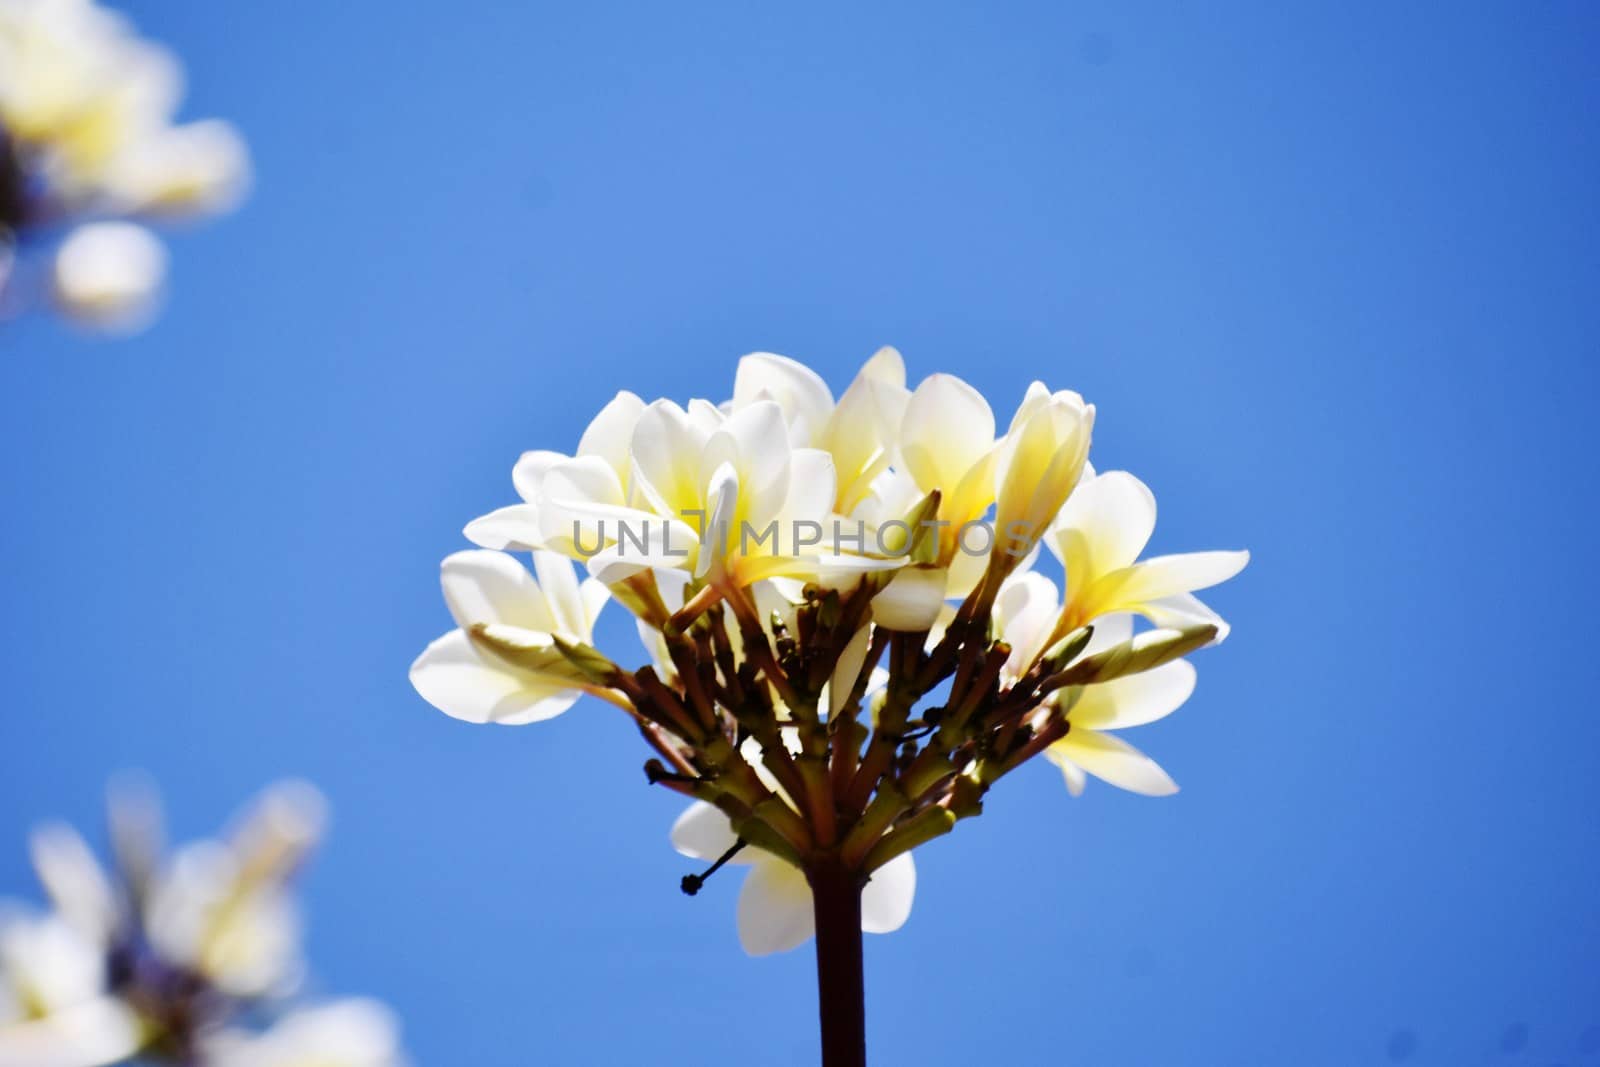 Bunch of white flowers against blue sky by ravindrabhu165165@gmail.com